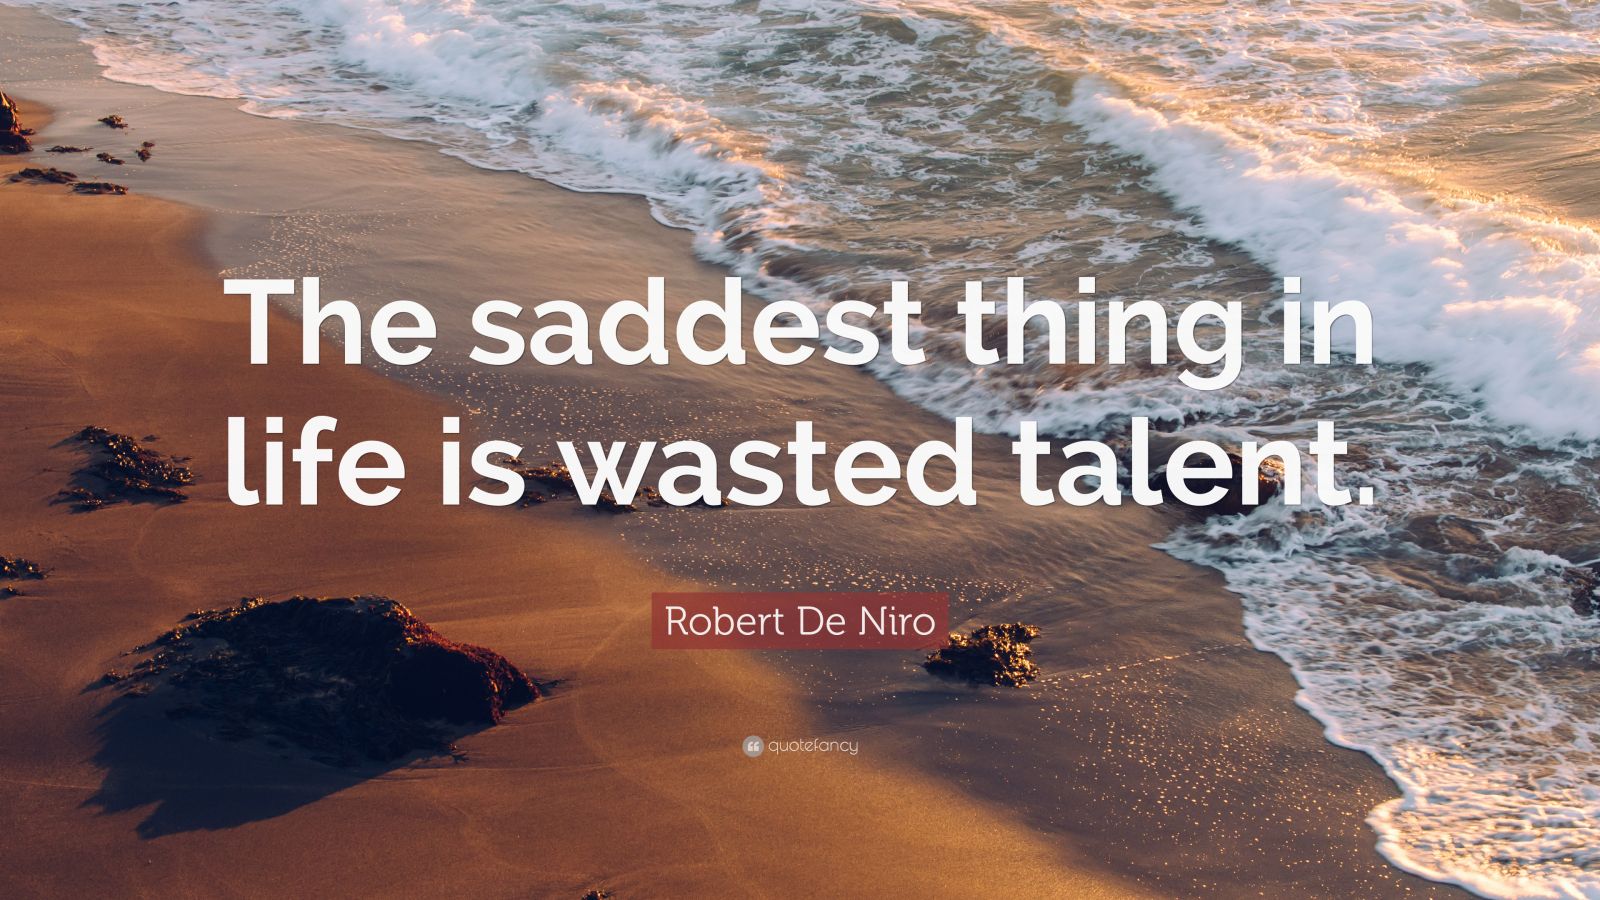 Robert De Niro Quote “The saddest thing in life is wasted talent.” (12